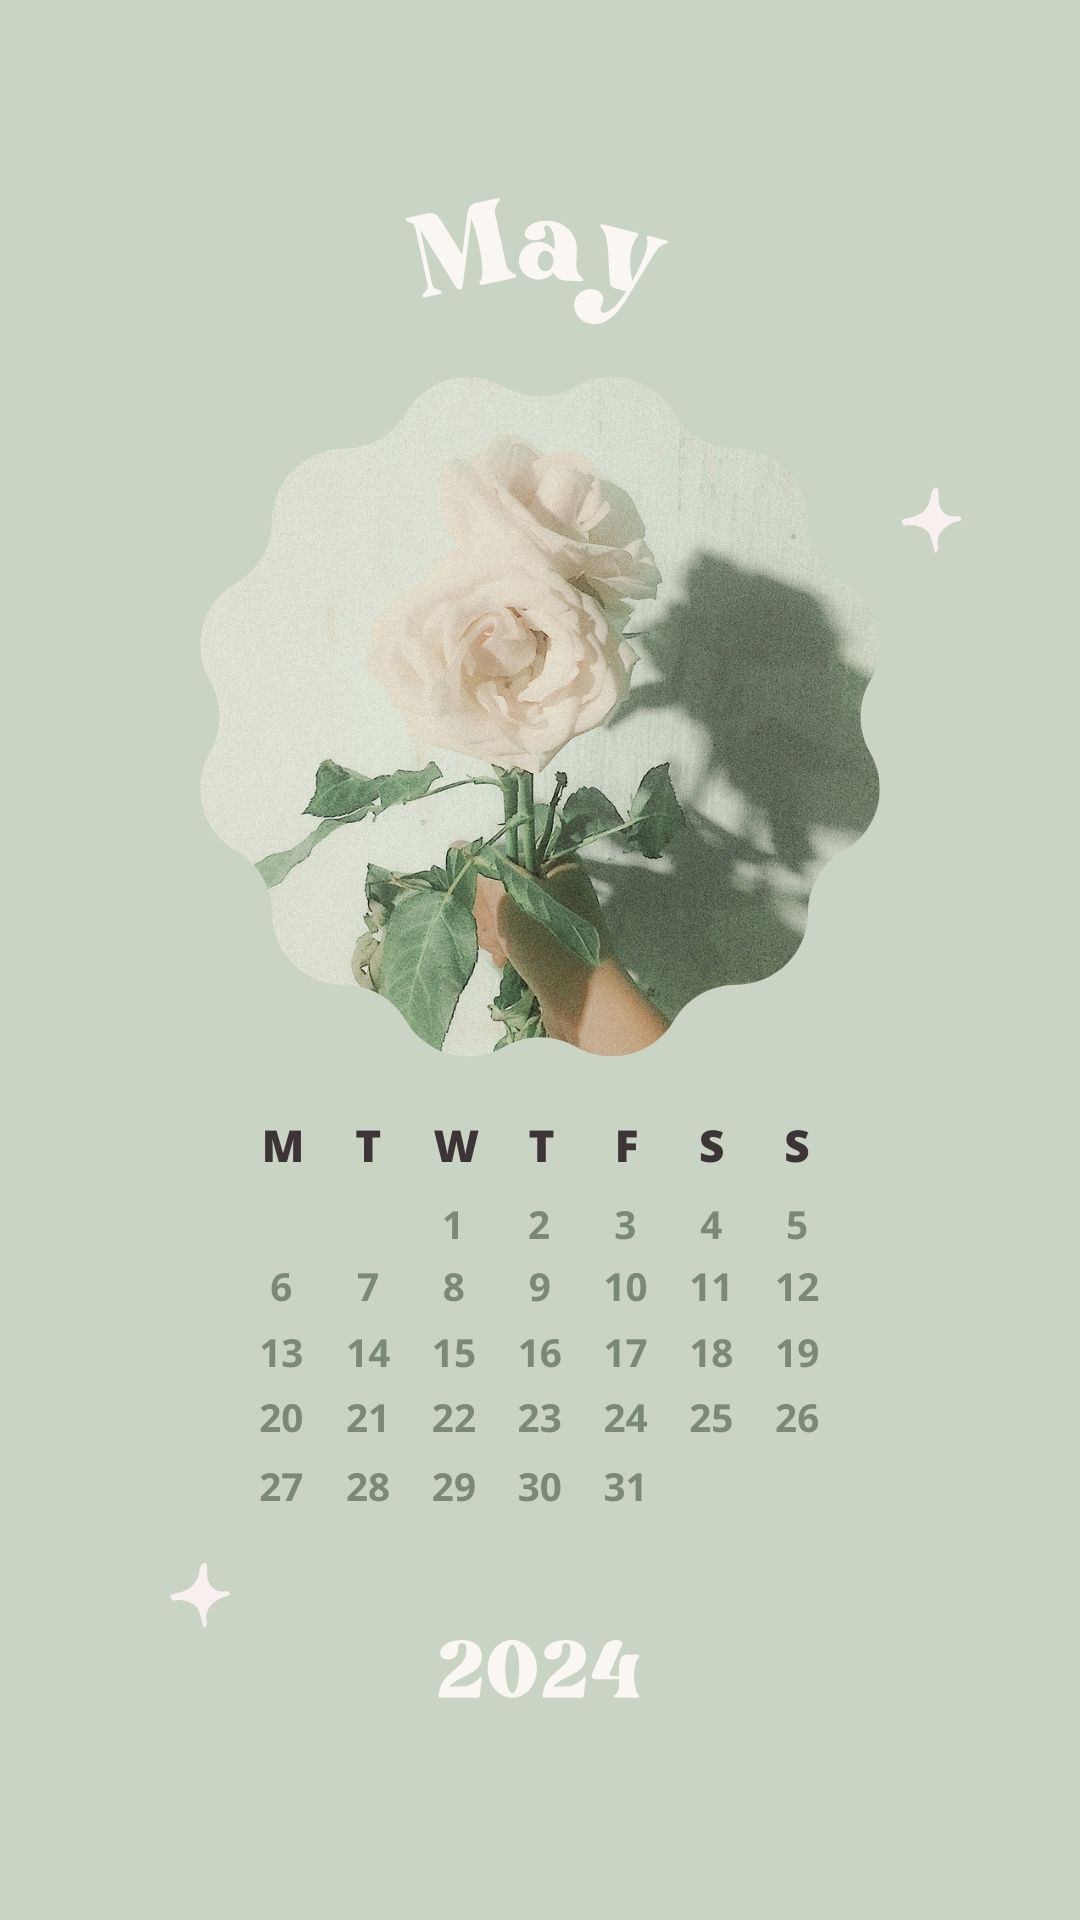 may 2024 sage green aesthetic phone background wallpaper calendar